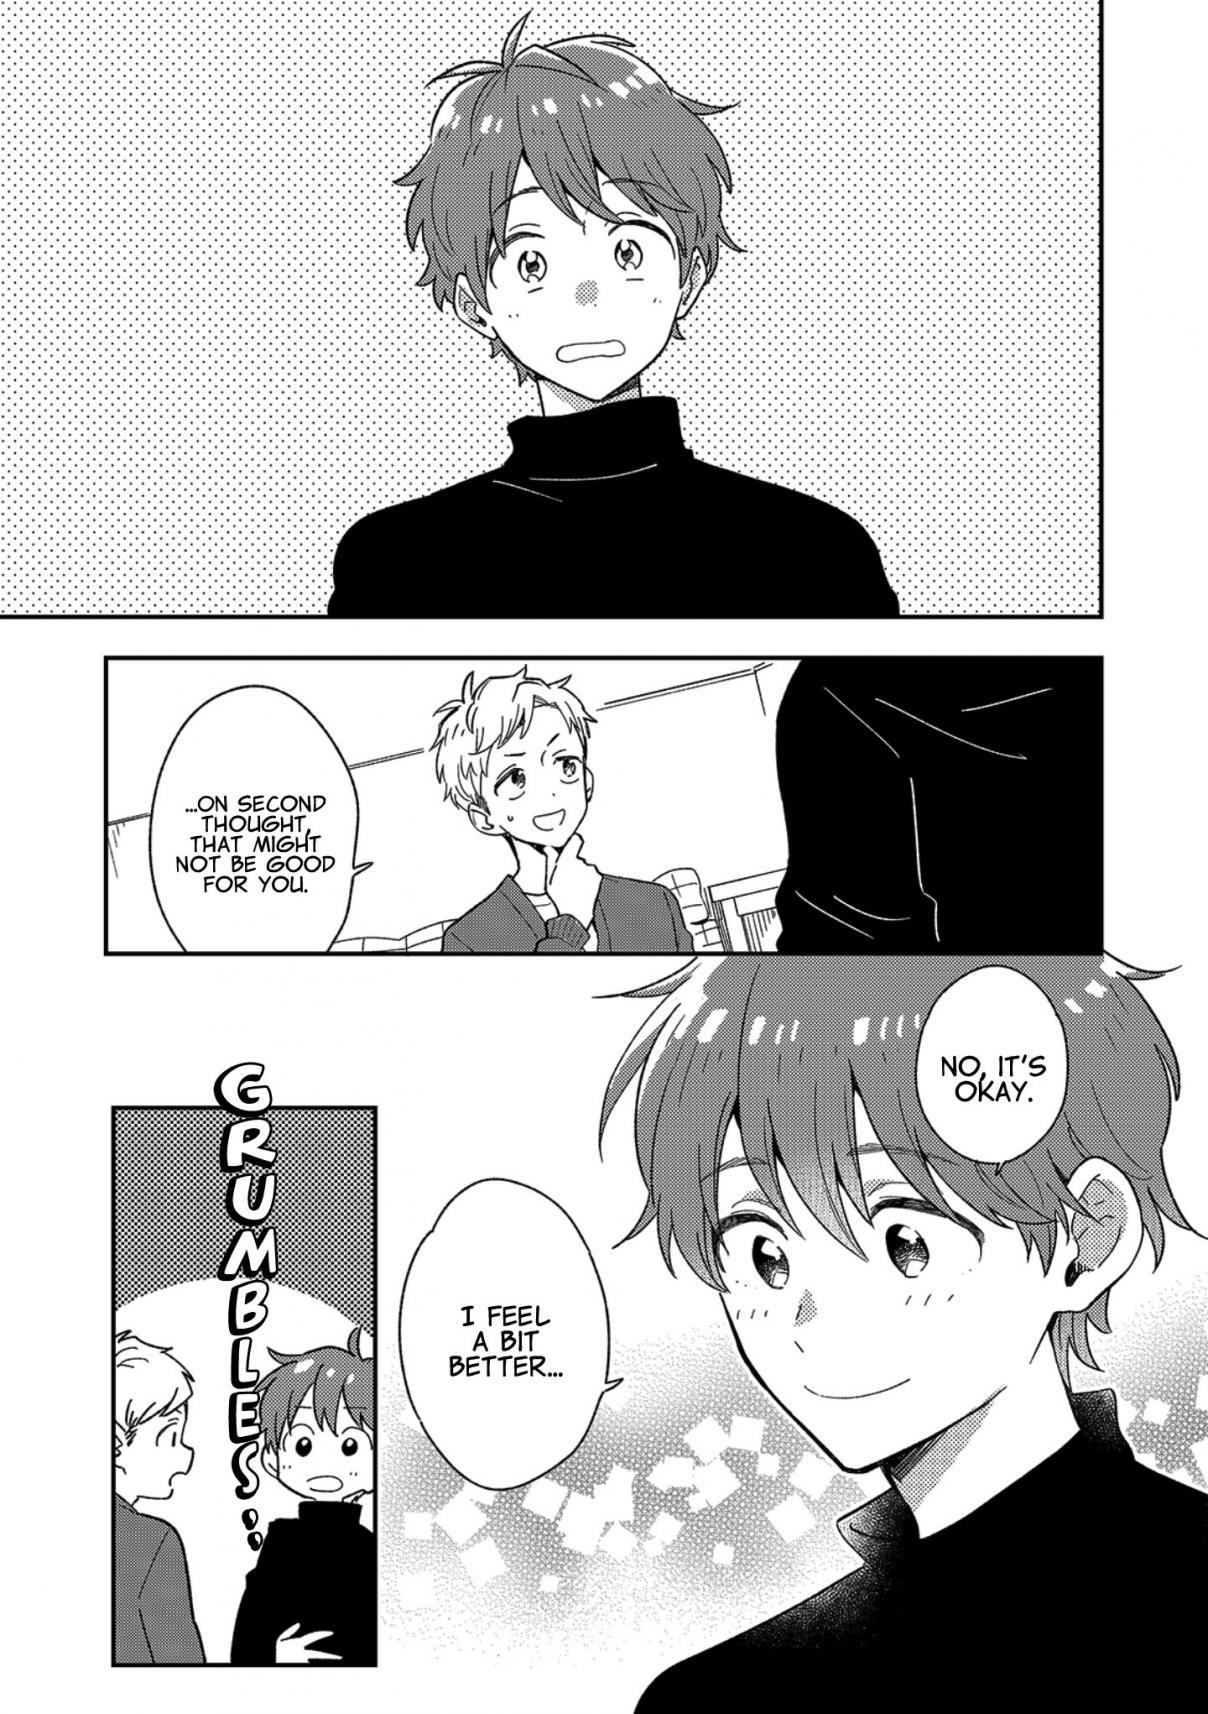 High School Boys Are Hungry Again Today Vol. 1 Ch. 10 Taco Rice